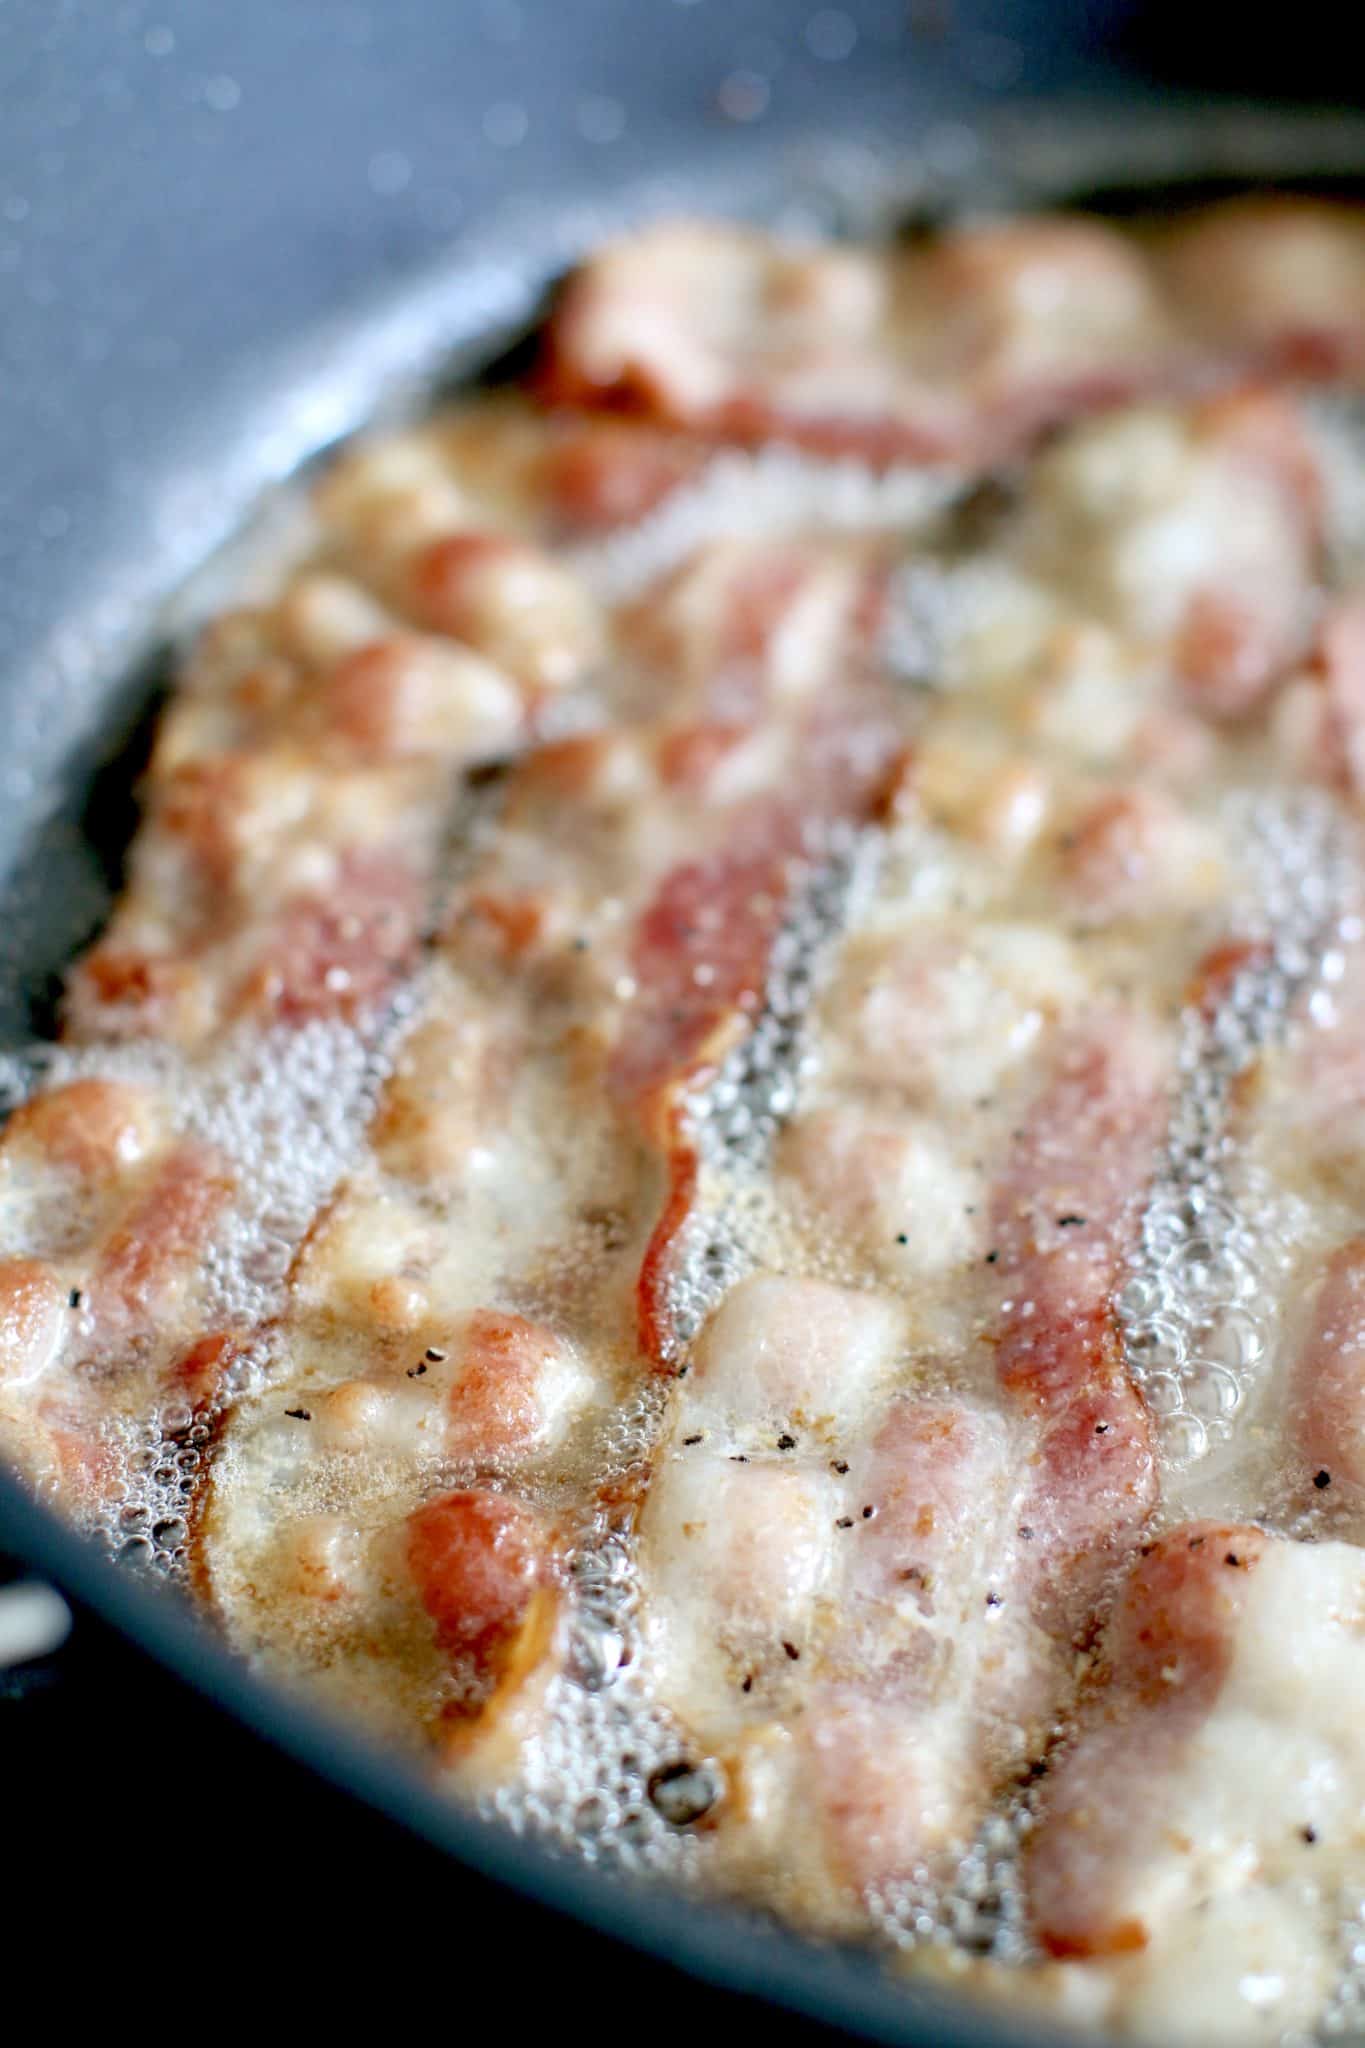 slices of bacon cooking in a pan.